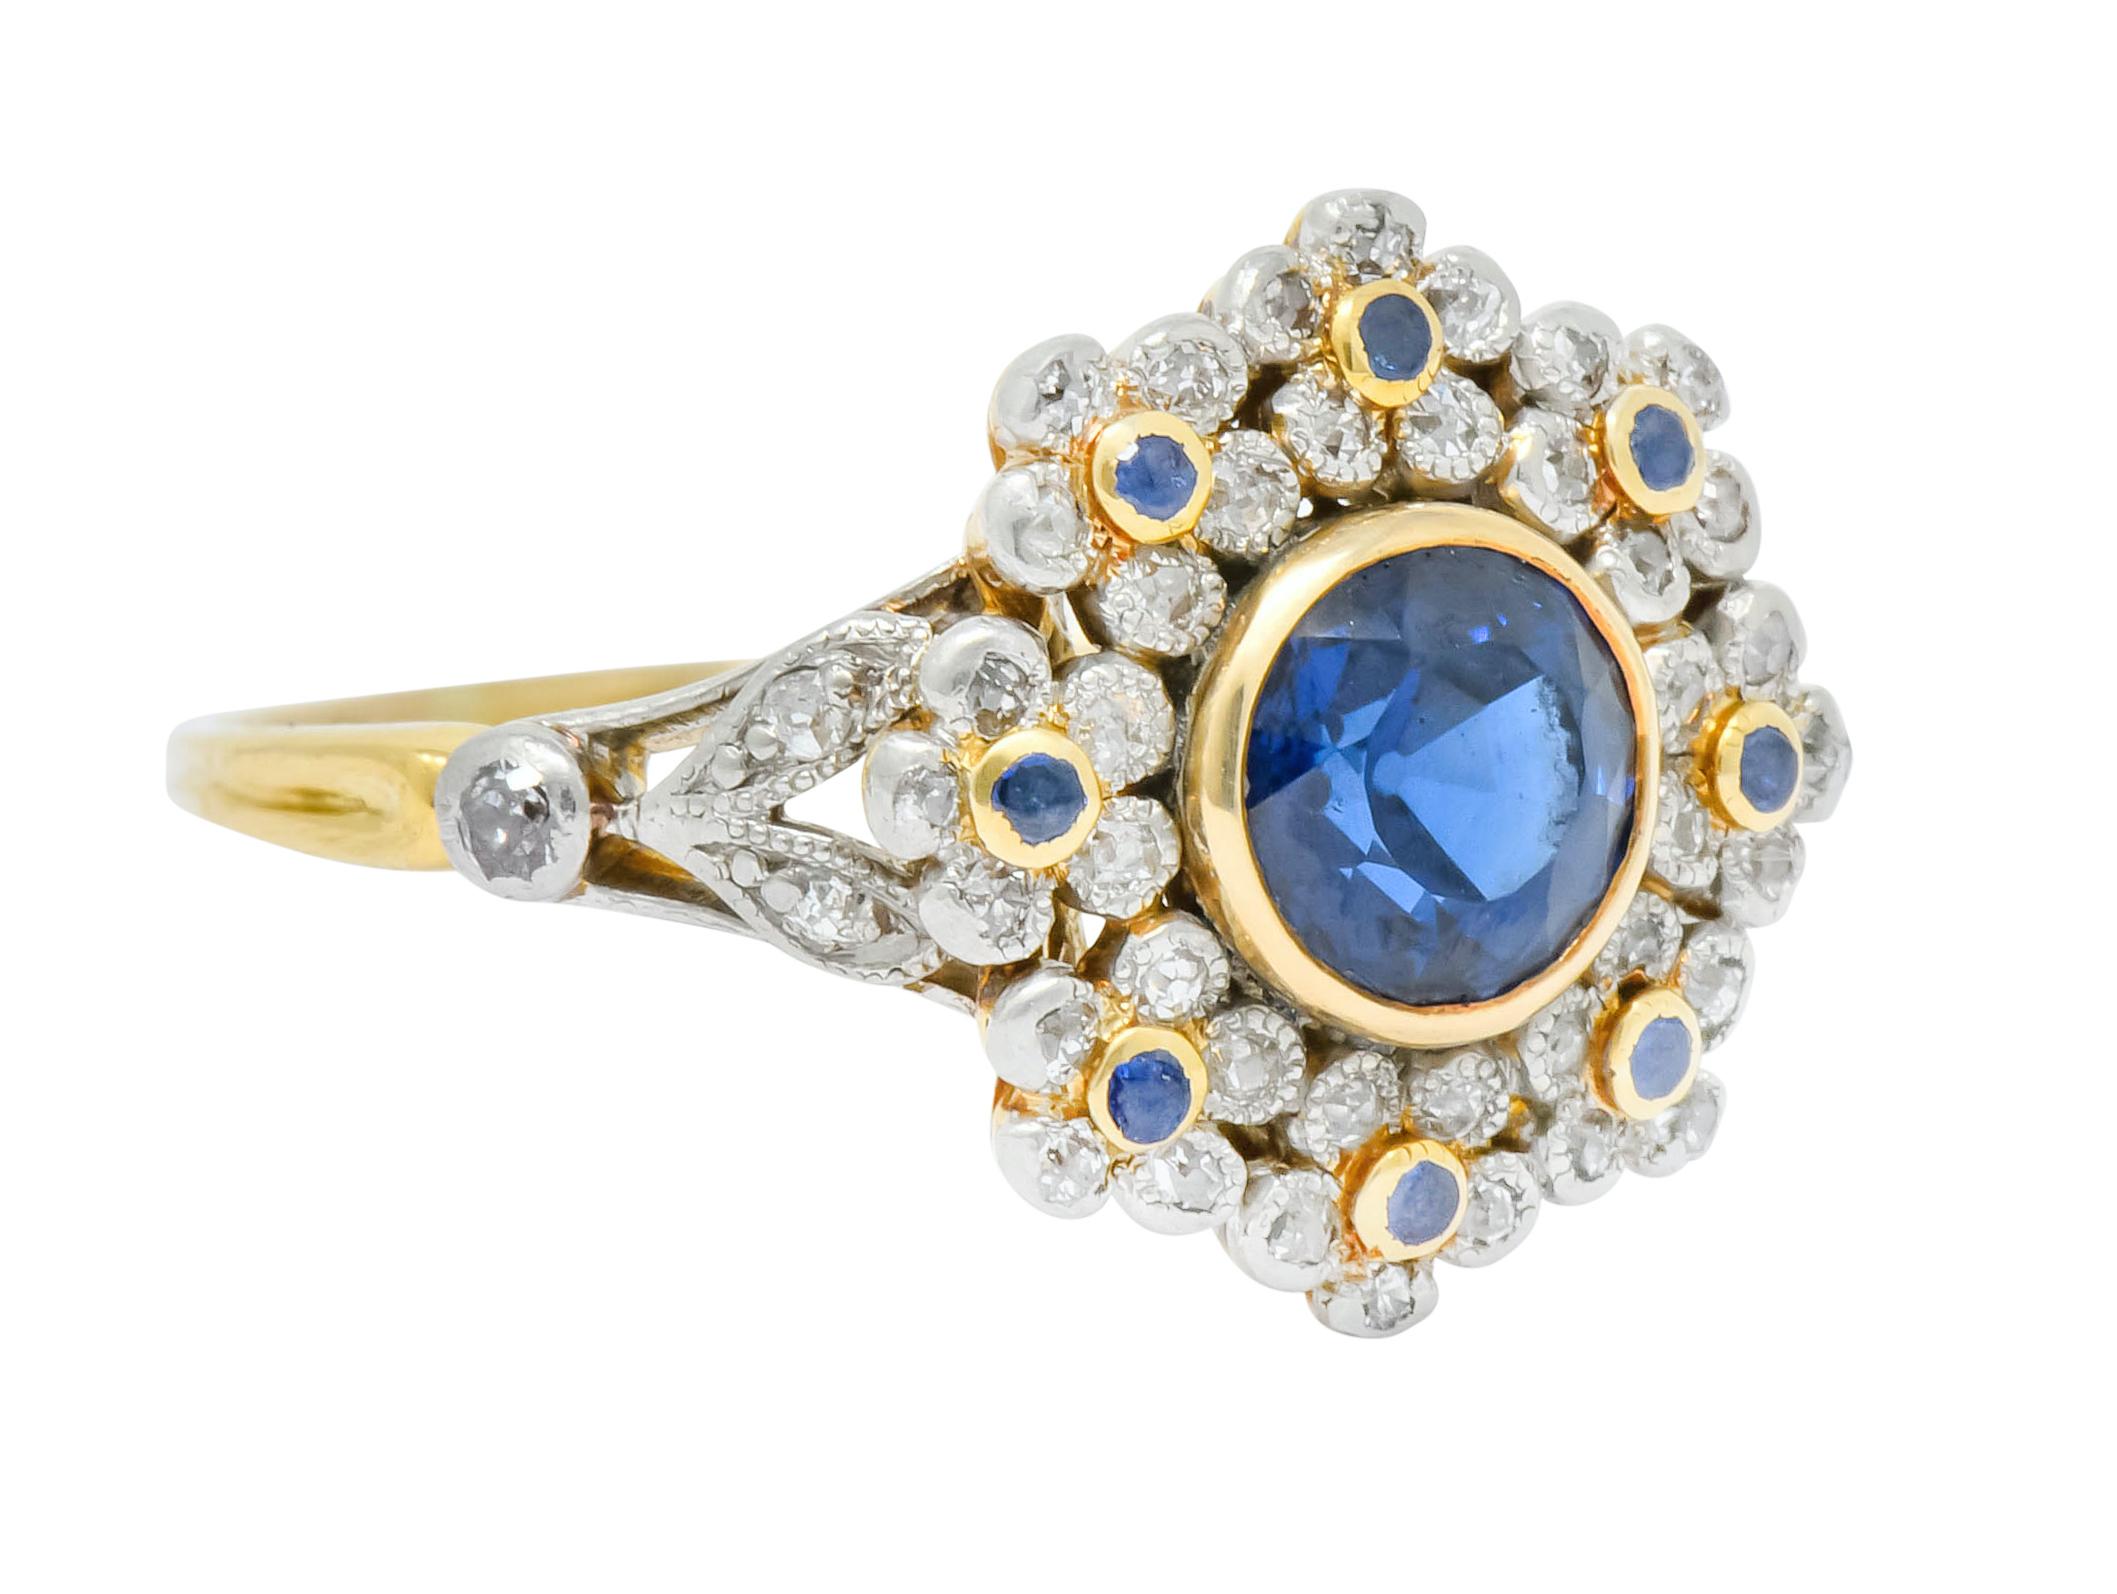 Centering a bezel set round cut sapphire weighing approximately 1.45 carats total, medium-dark royal blue in color

Surrounded by flowers in a cluster style, flanked by platinum foliate split shoulders

Accented throughout by round cut sapphires and